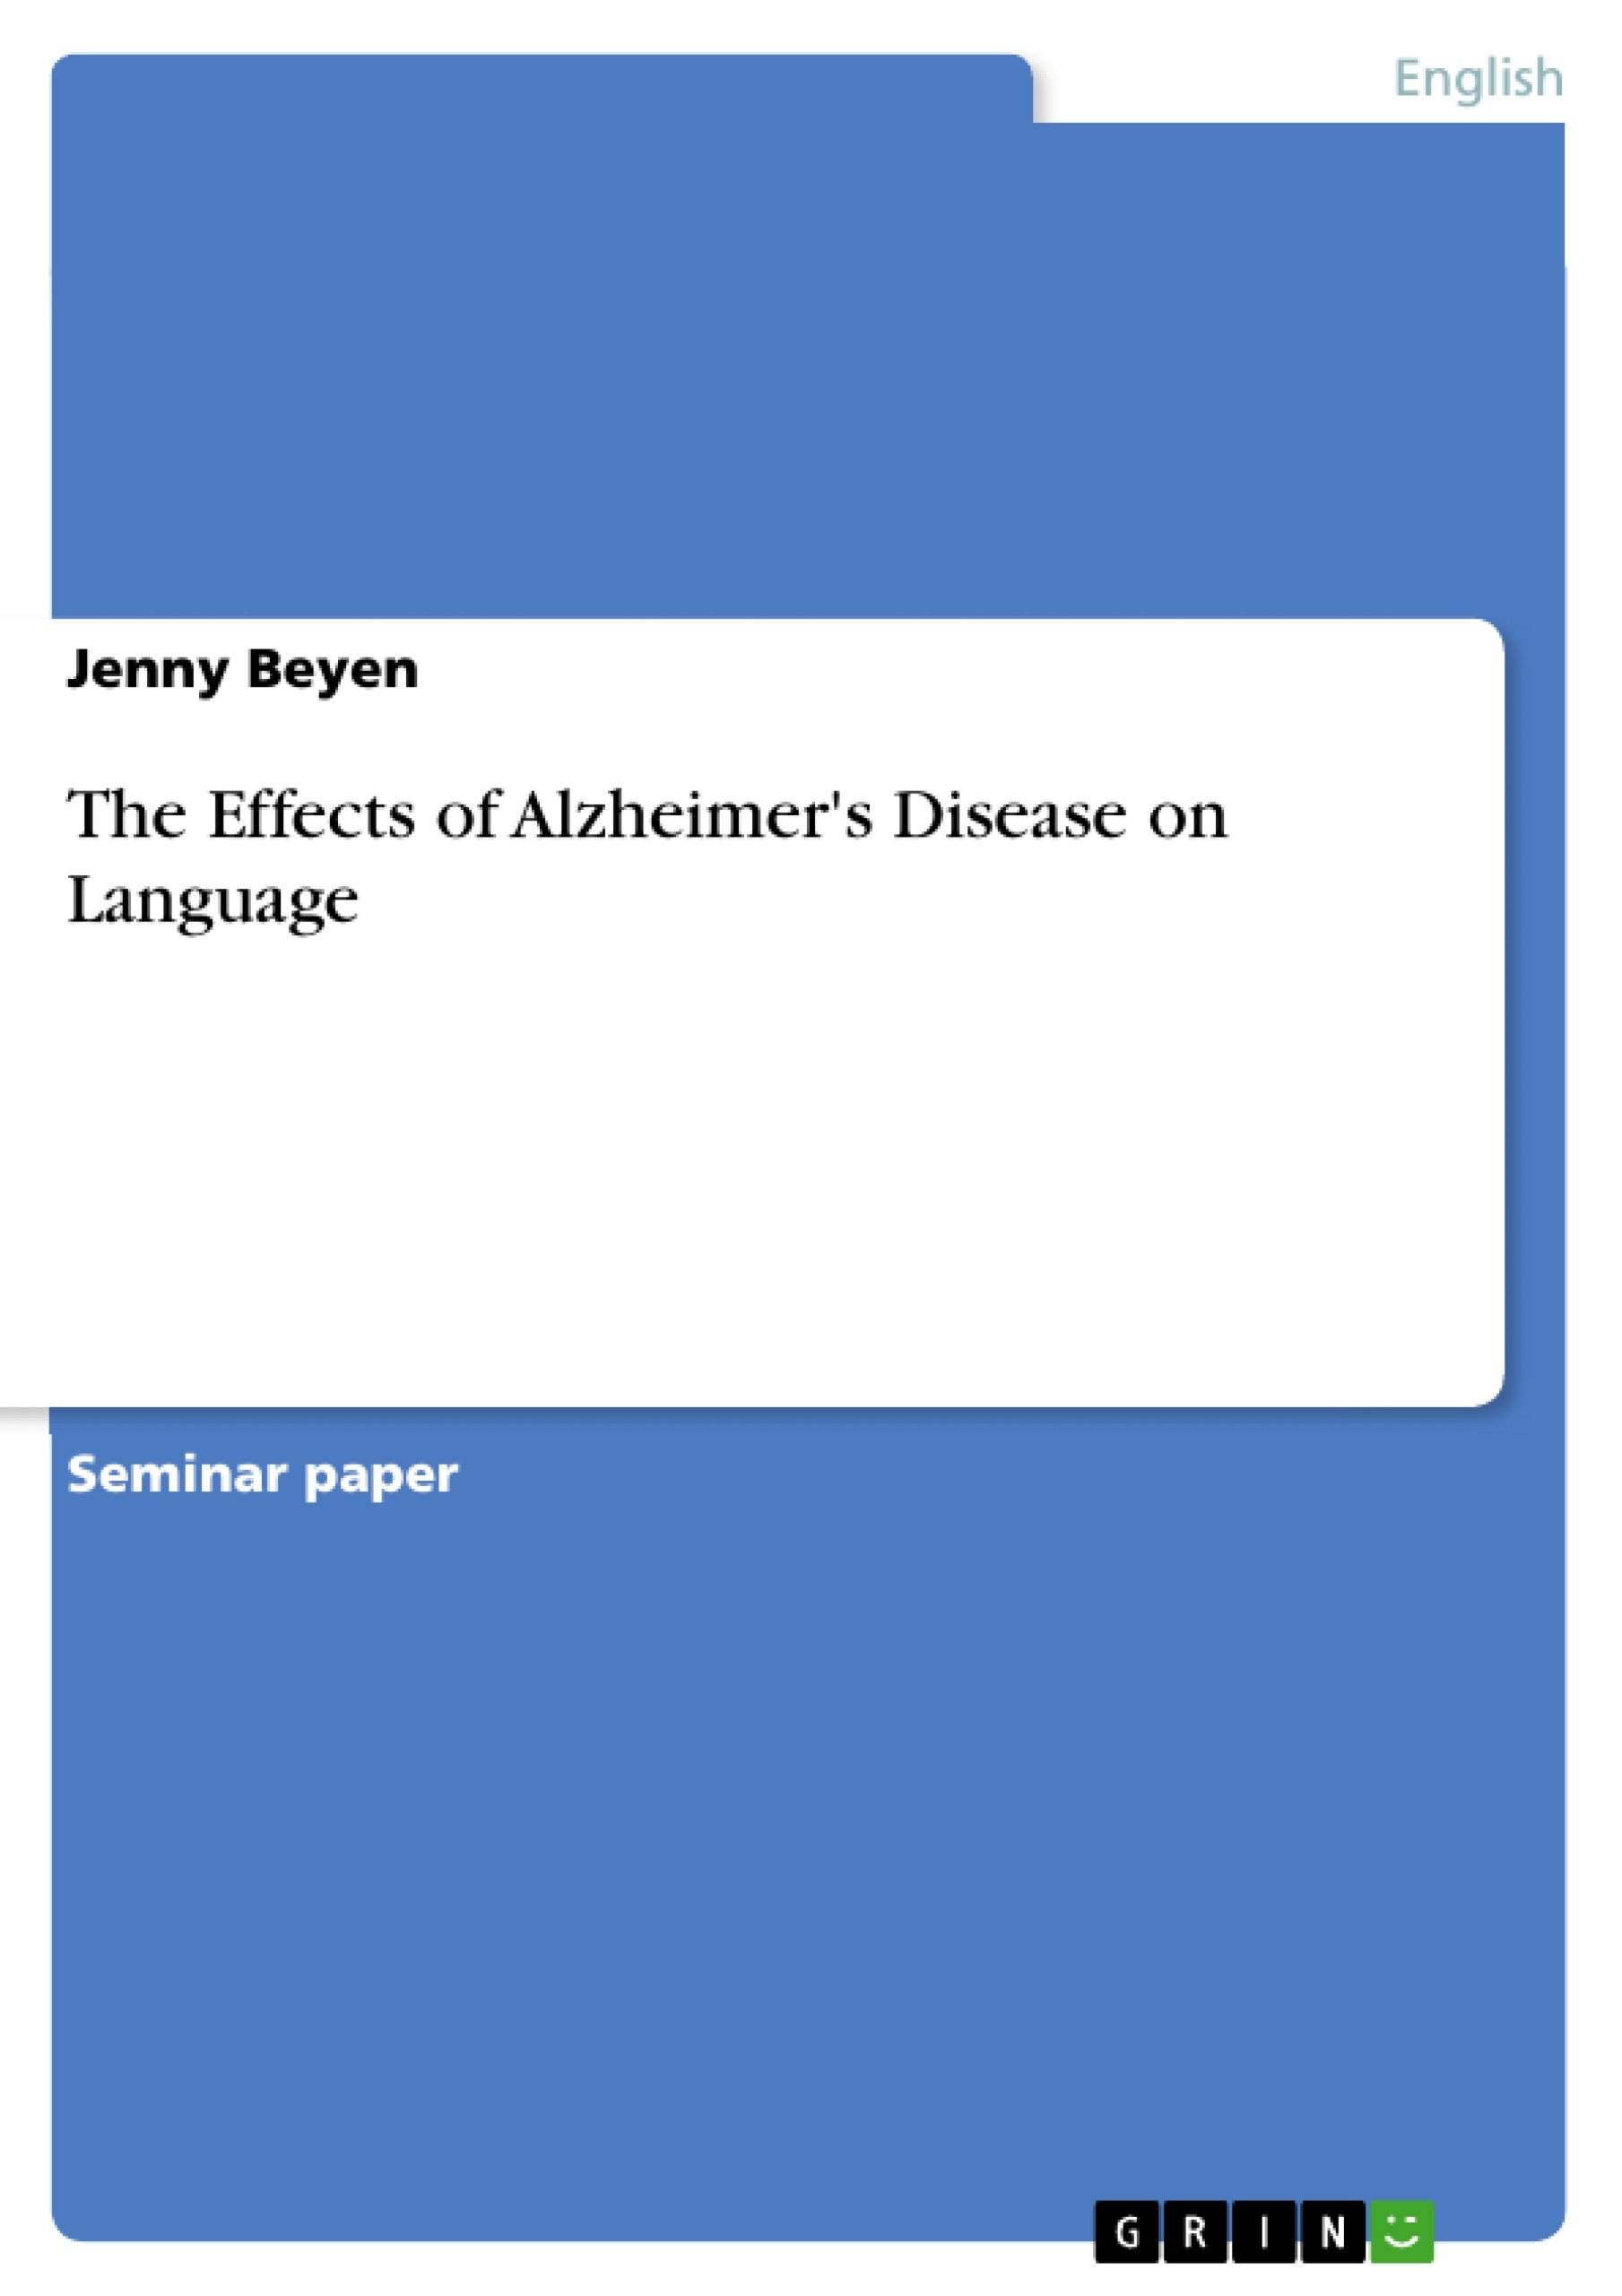 Titre: The Effects of Alzheimer's Disease on Language